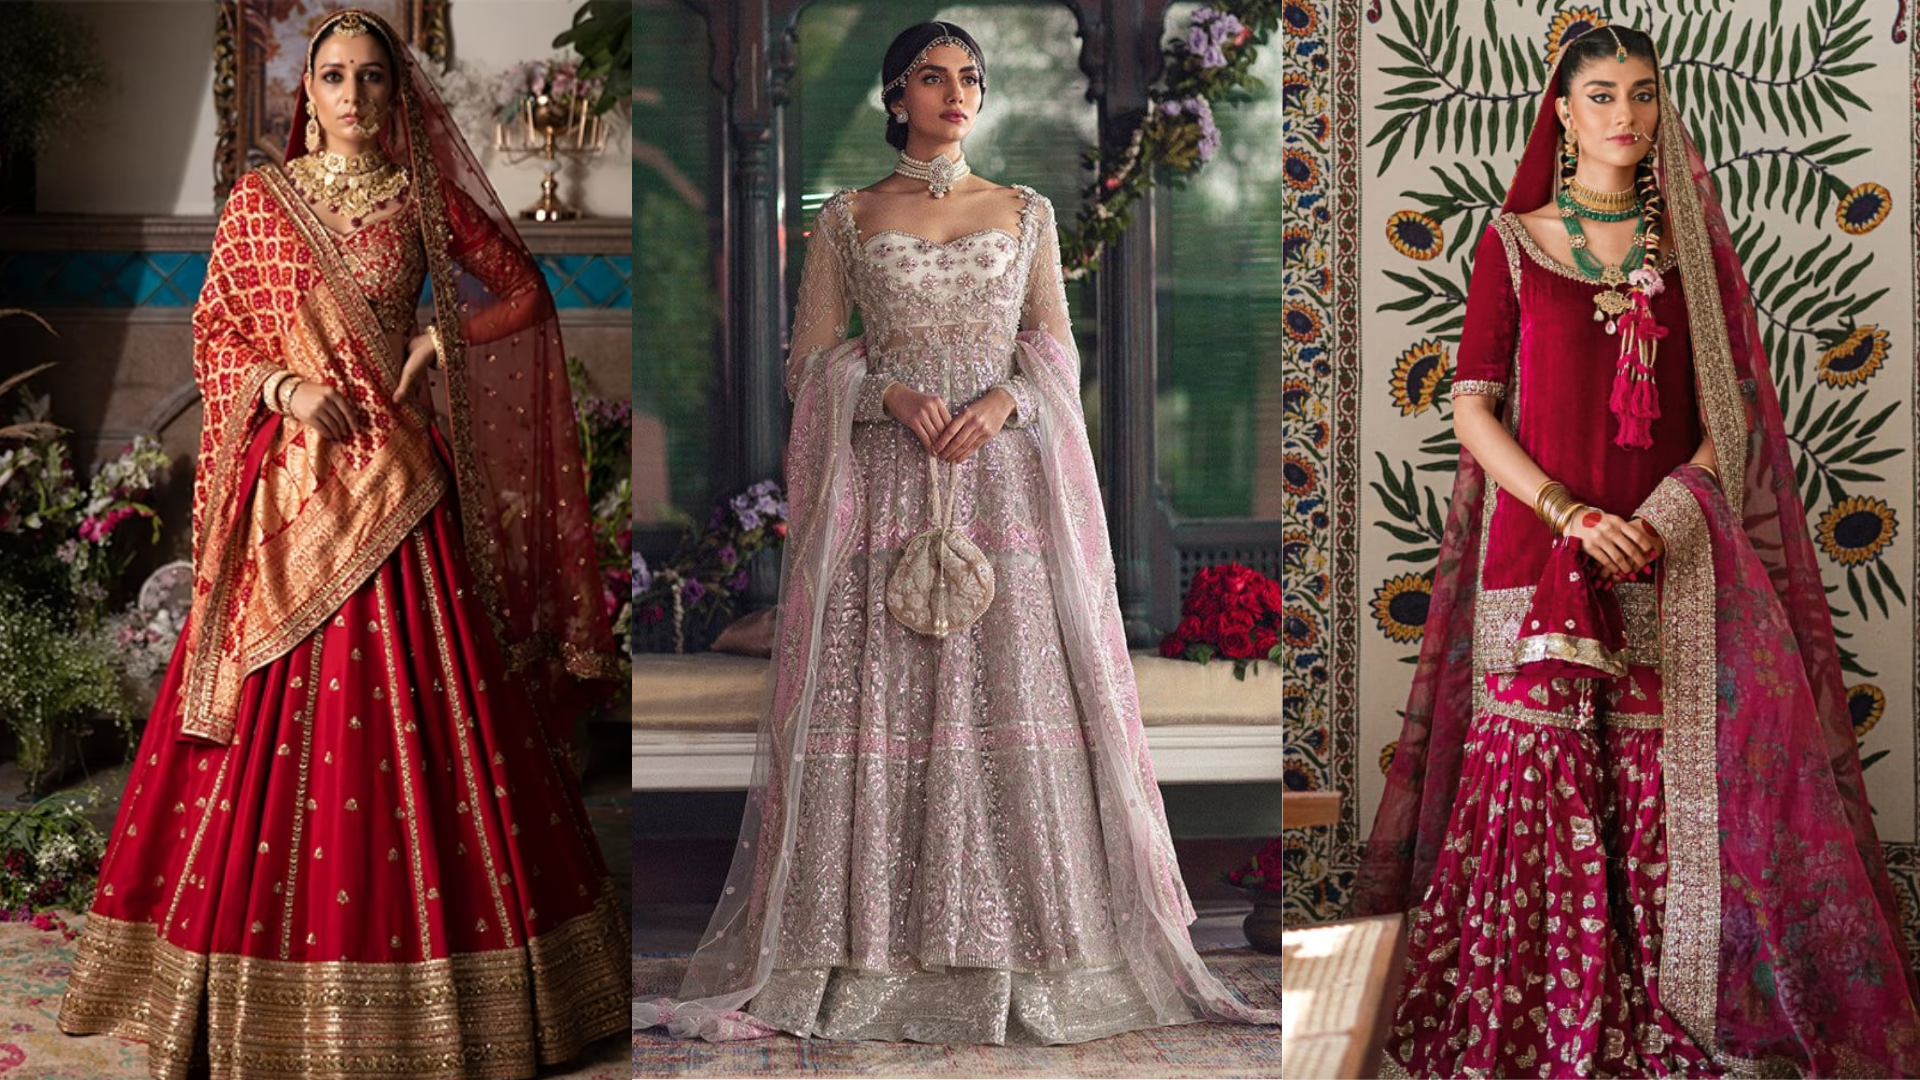 How Has The Indian Bridal Wear Journeyed Across Generations?